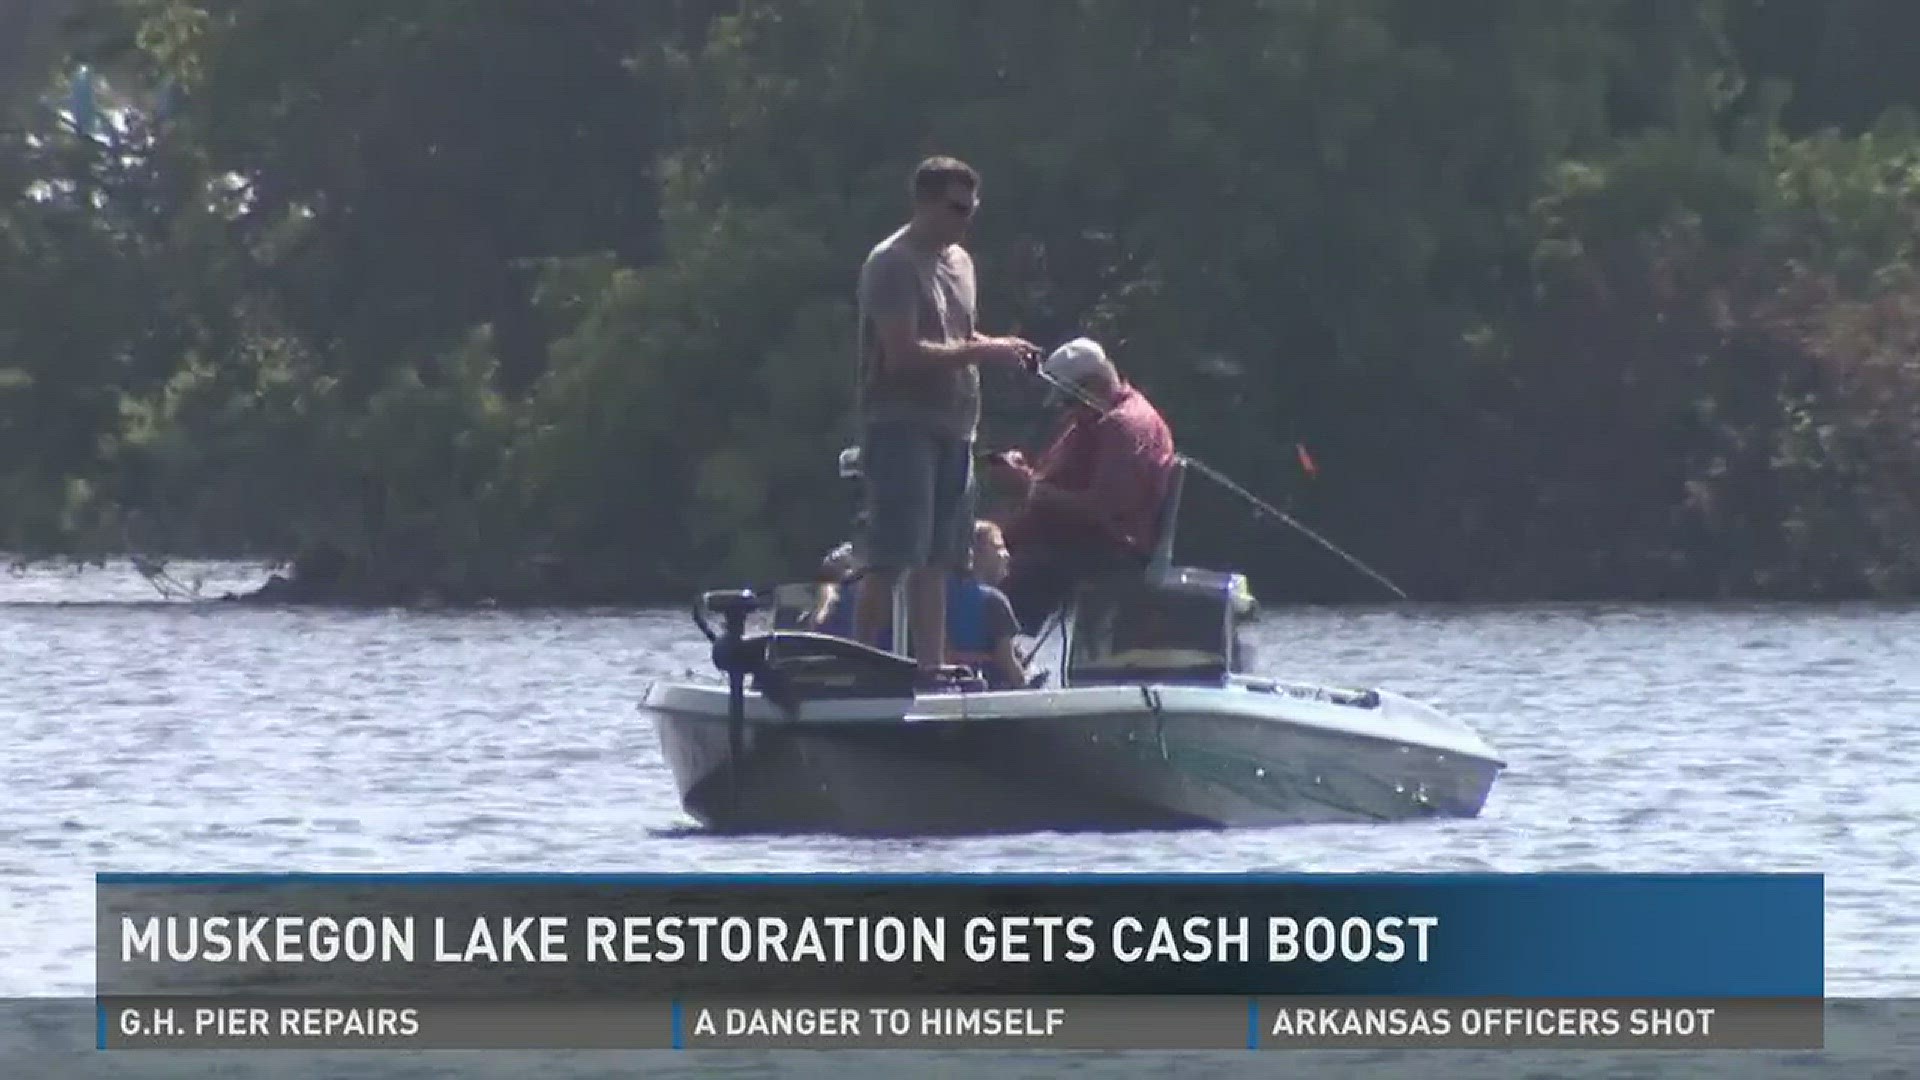 A $7.9 million federal grant was awarded to help with ongoing efforts to clean up Muskegon Lake.